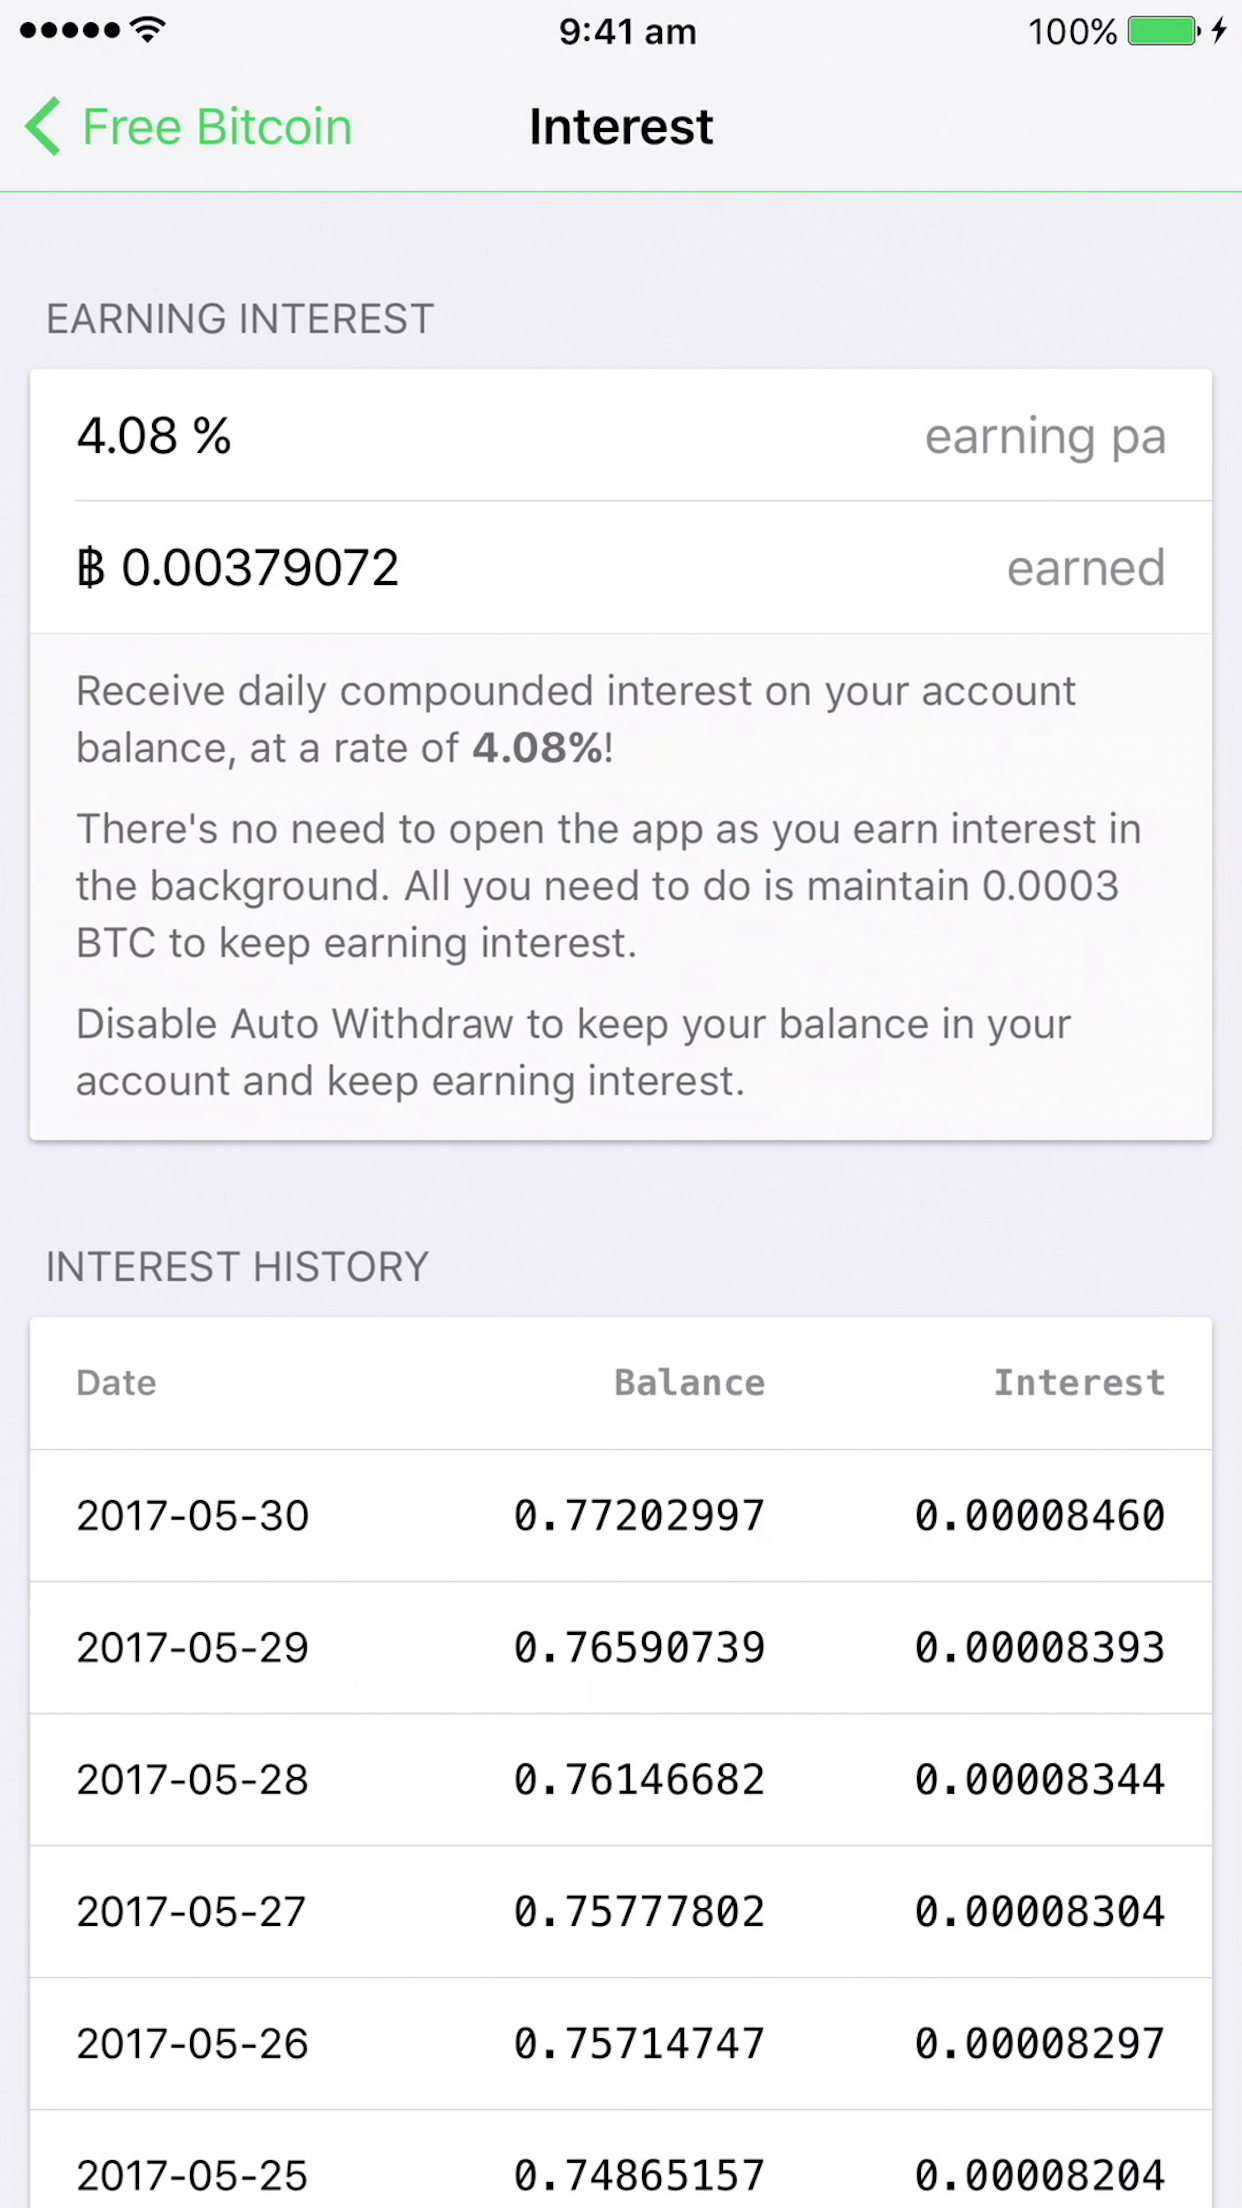 Earn interest at 4.08% on your bitcoin